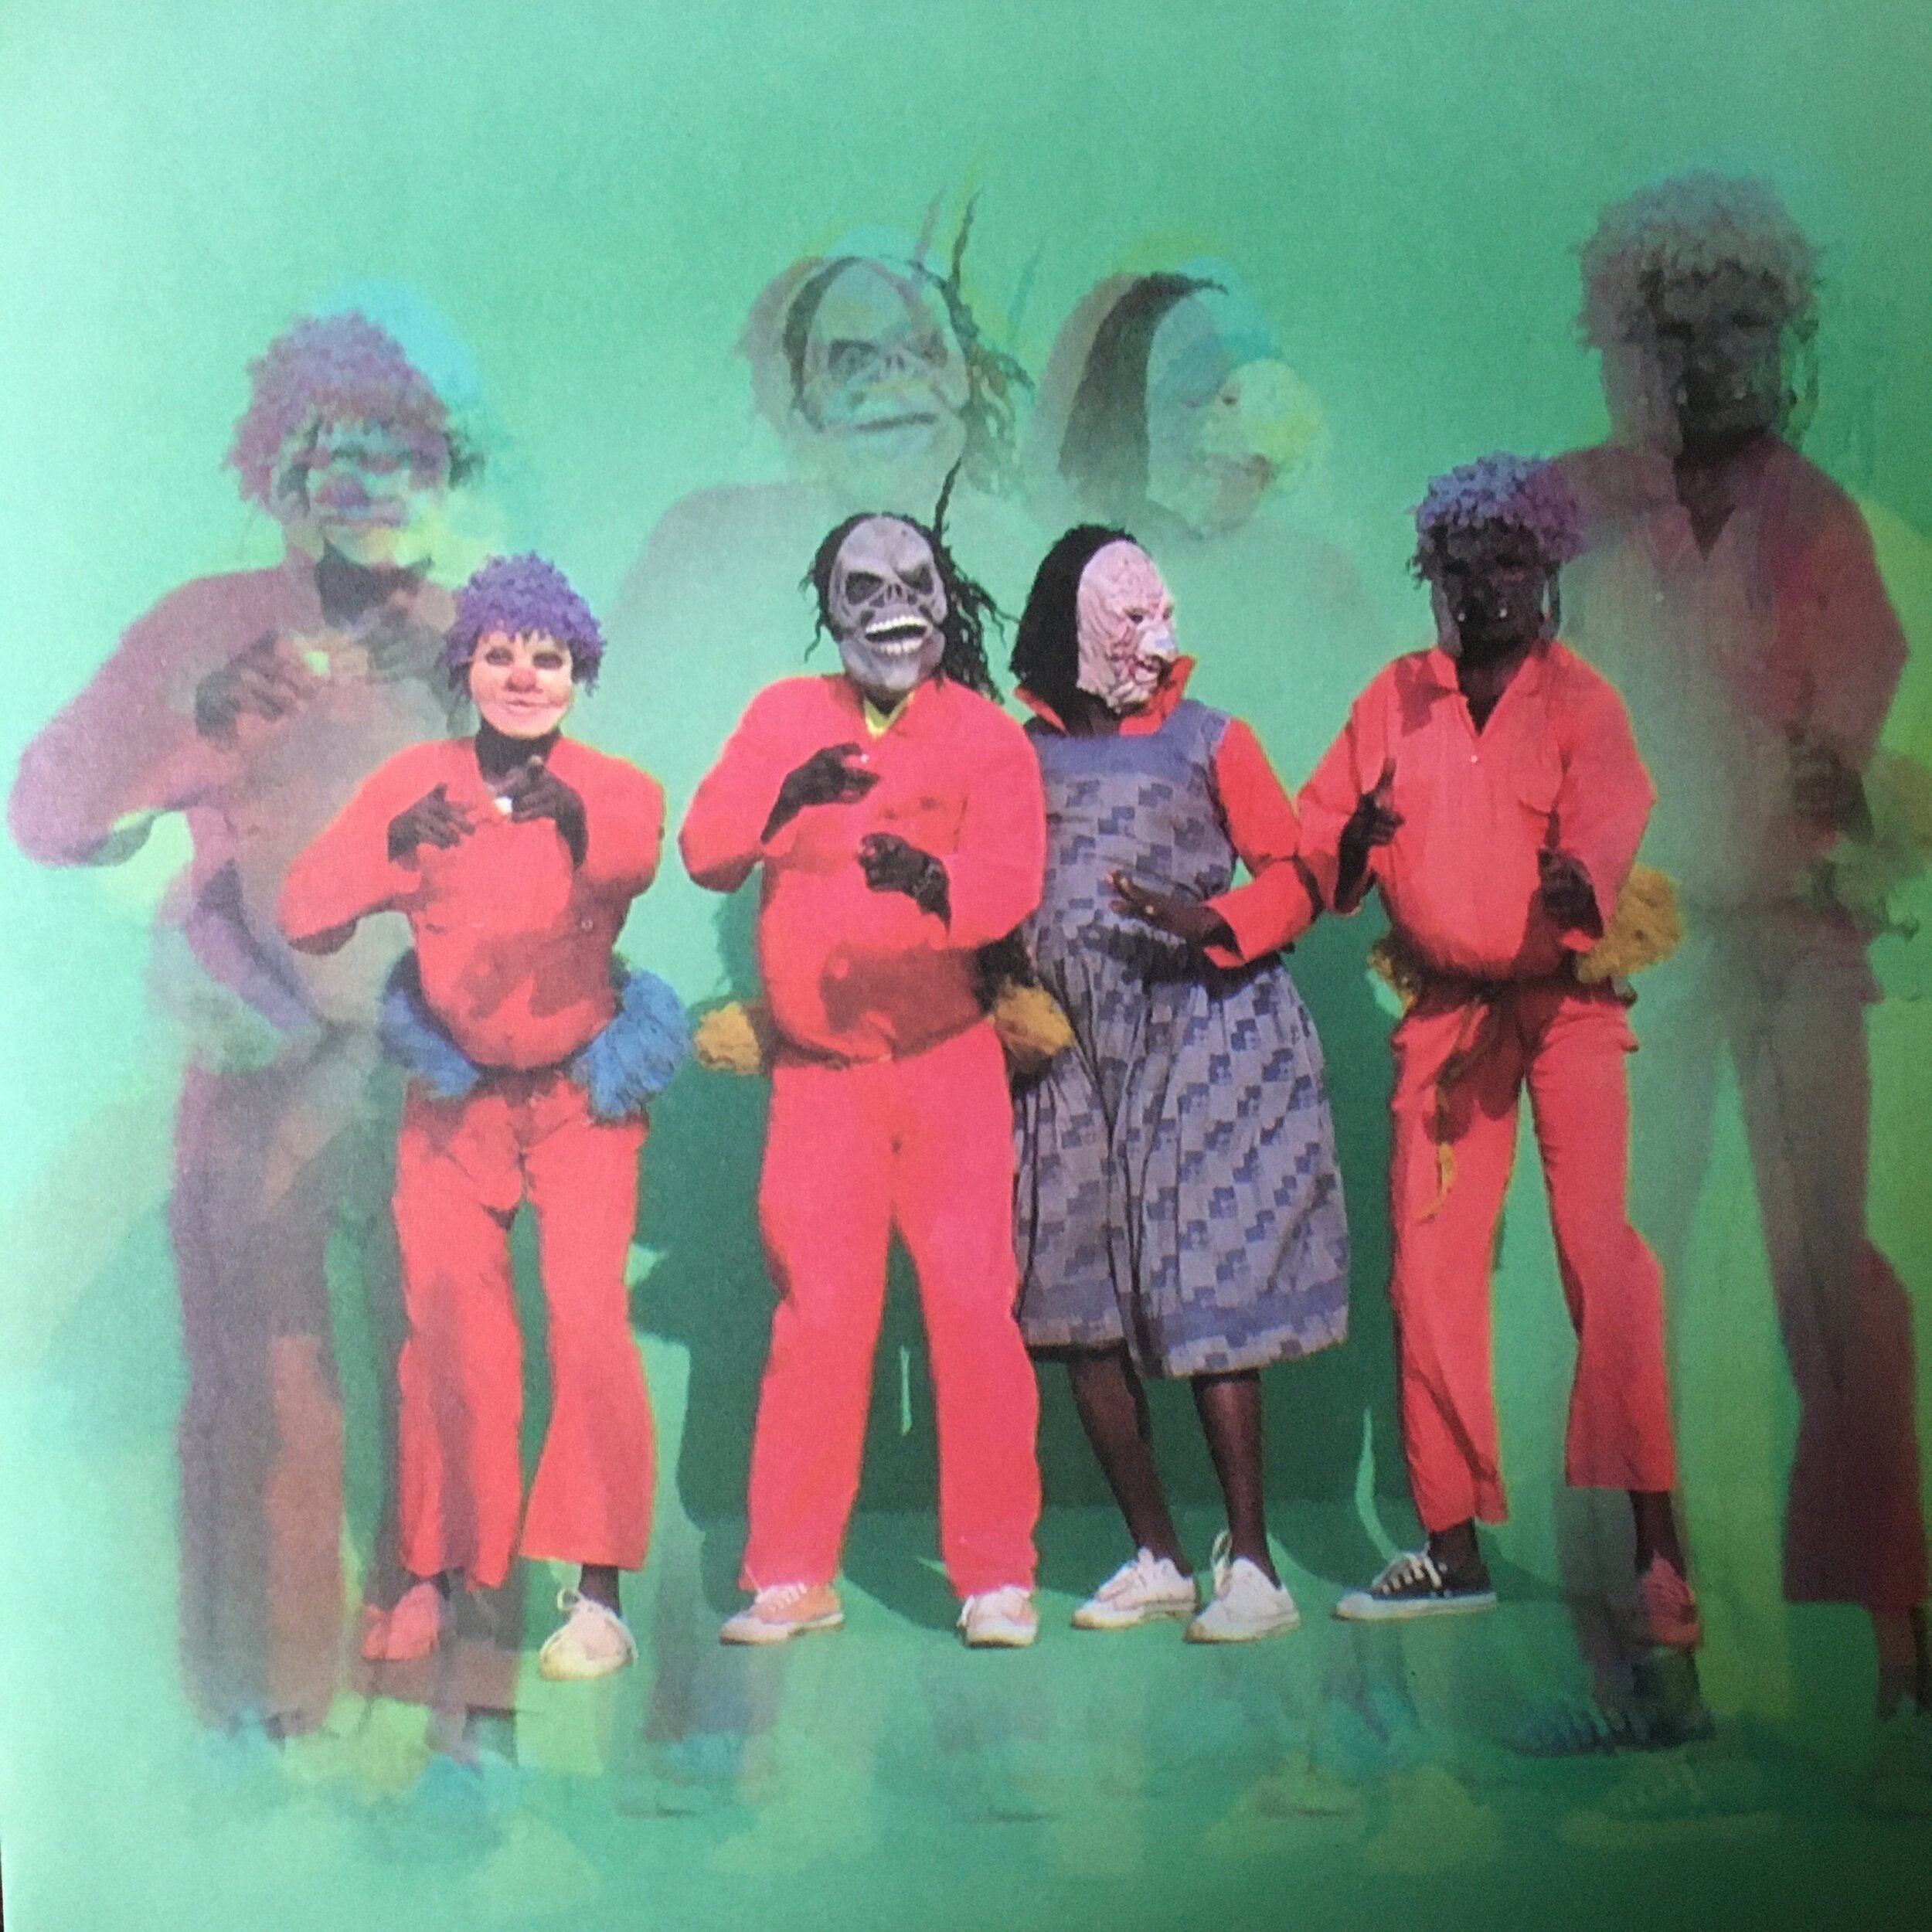 Shangaan Electro | New Wave Dance Music From South Africa